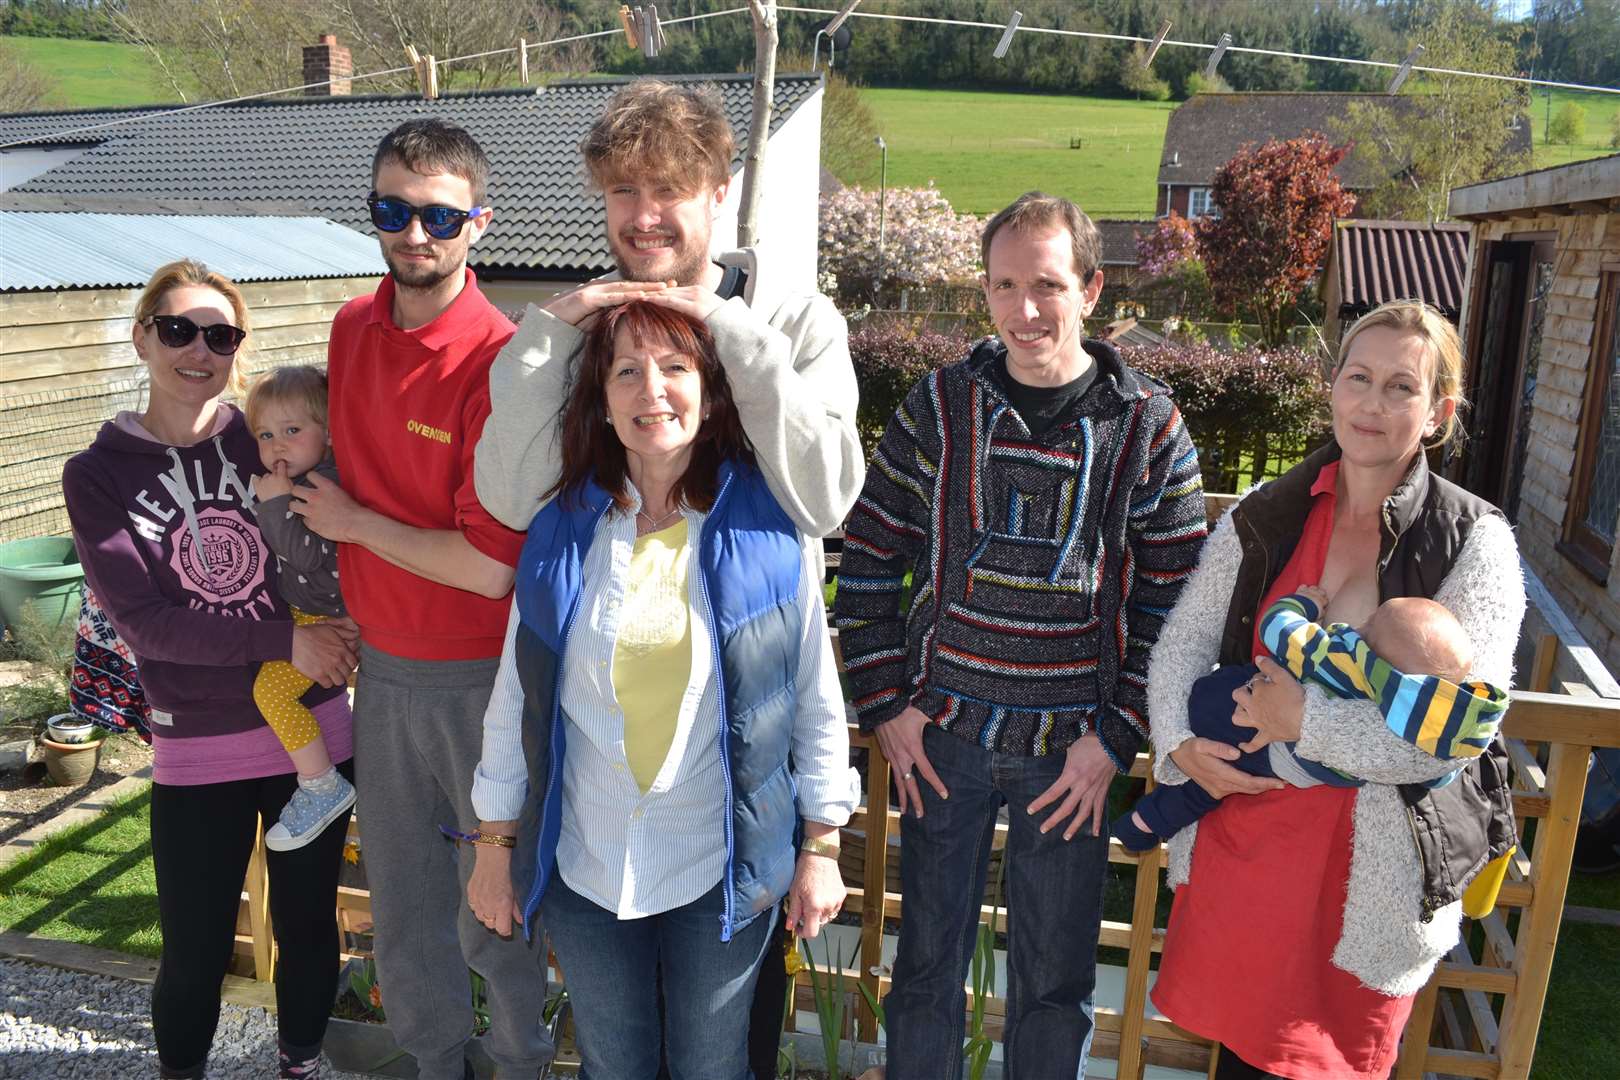 Rebecca (right) holding her son with her mother Lyn (centre) and siblings (l-r) Kate, Jacob, Jordan and Daniel